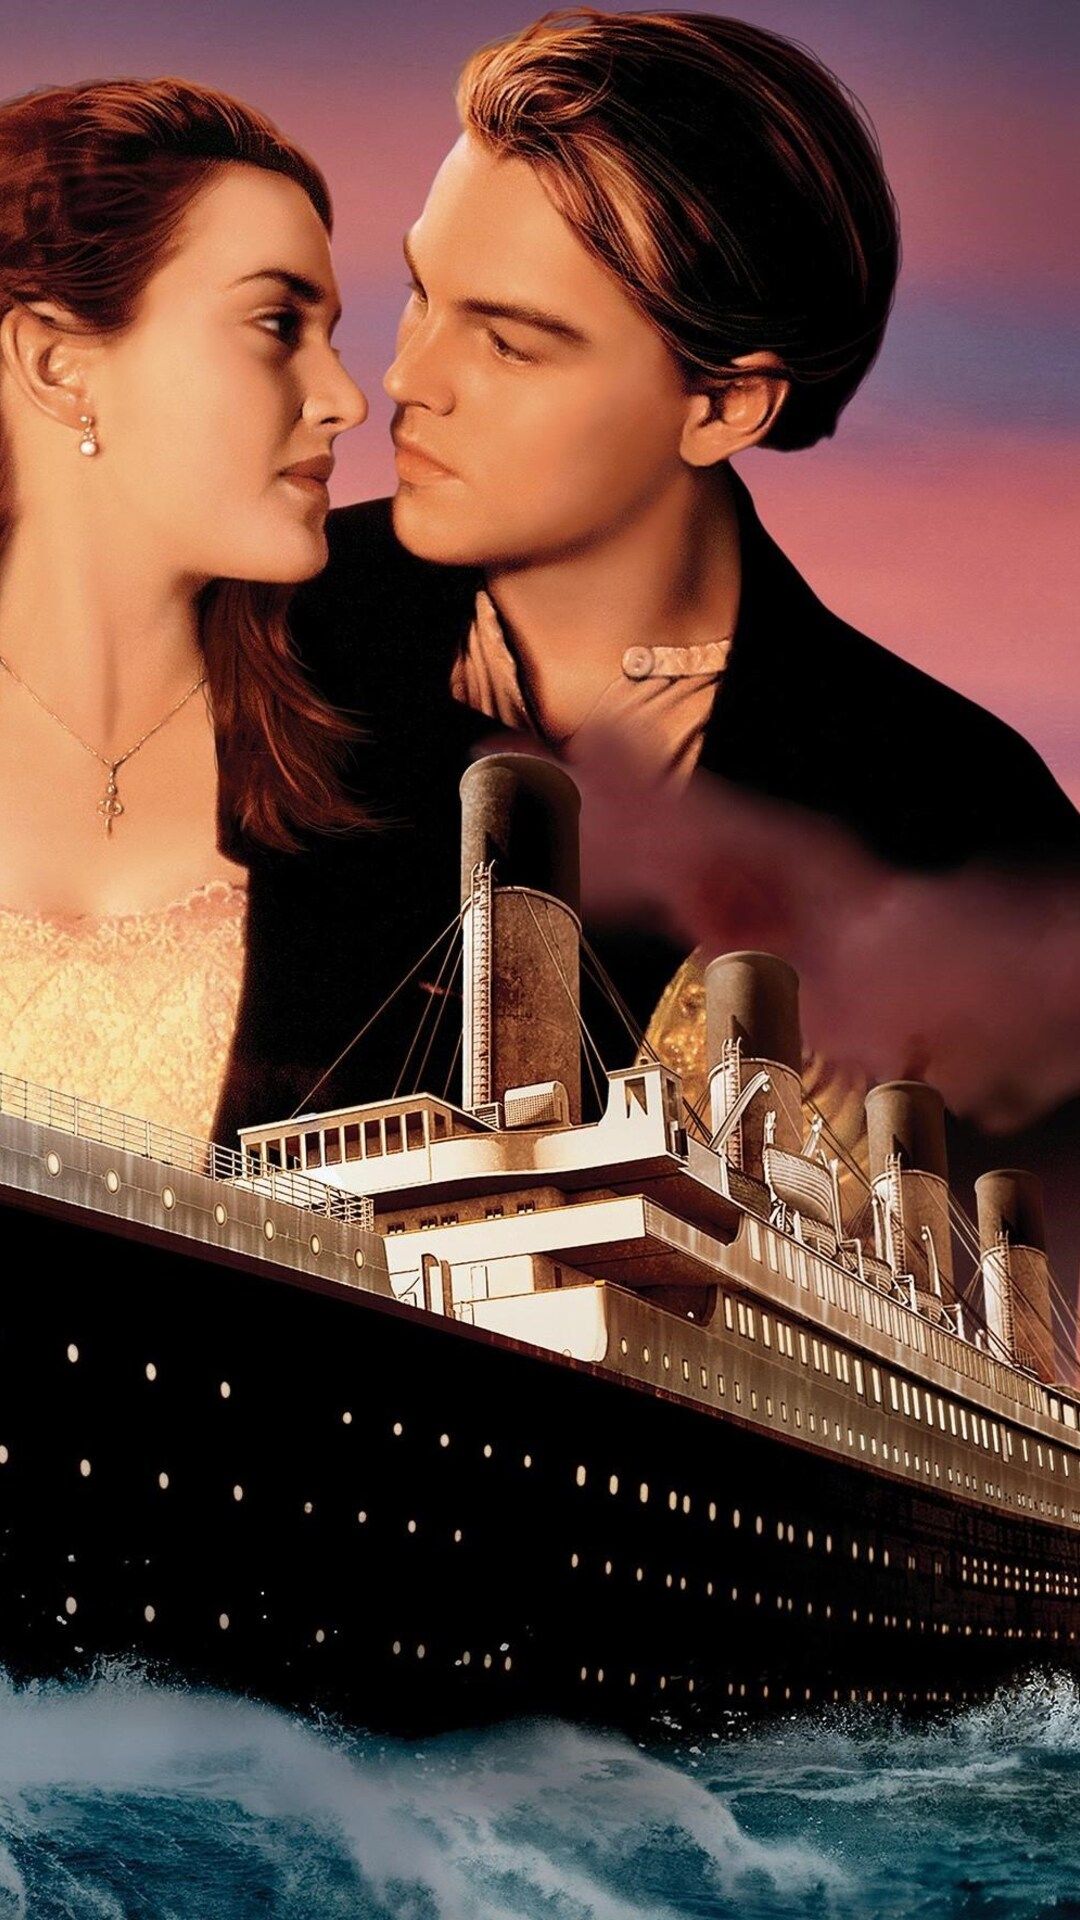 Titanic Movie Full HD iPhone 6s, 6 Plus, Pixel xl , One Plus 3t, 5 HD 4k Wallpaper, Image, Background, Photo and Picture